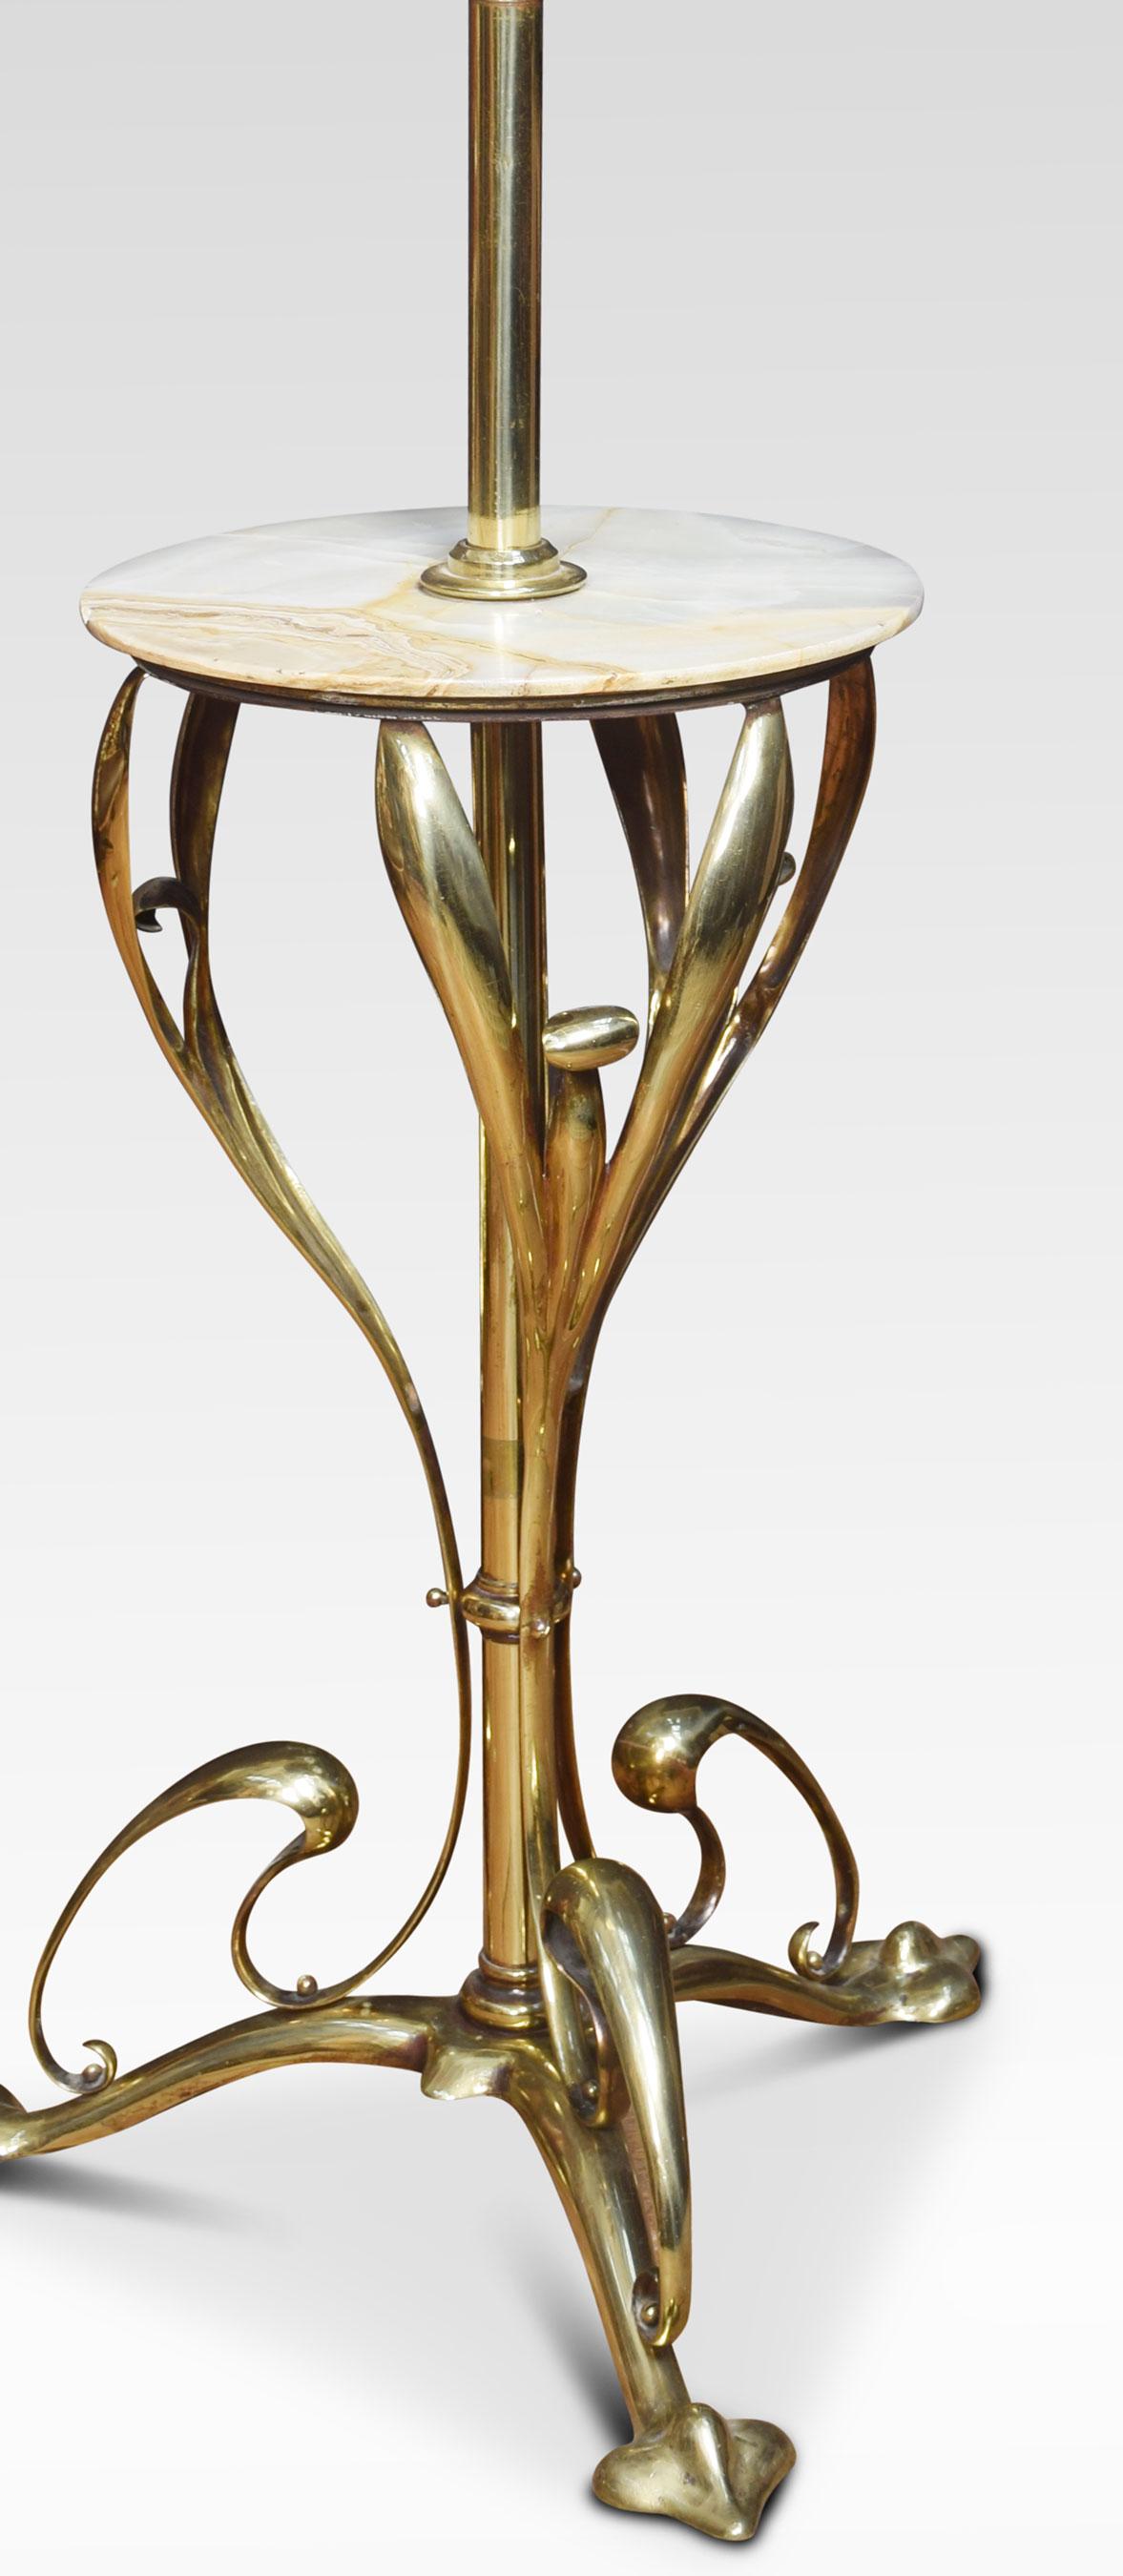 Art Nouveau standard lamp the brass adjustable column supporting a circular white marble tabletop above impressive scrolling supports. All raised up on three pad feet.
Dimensions
Height 66 inches (Adjustable)
Length 22.5 inches
Depth 22.5 inches.